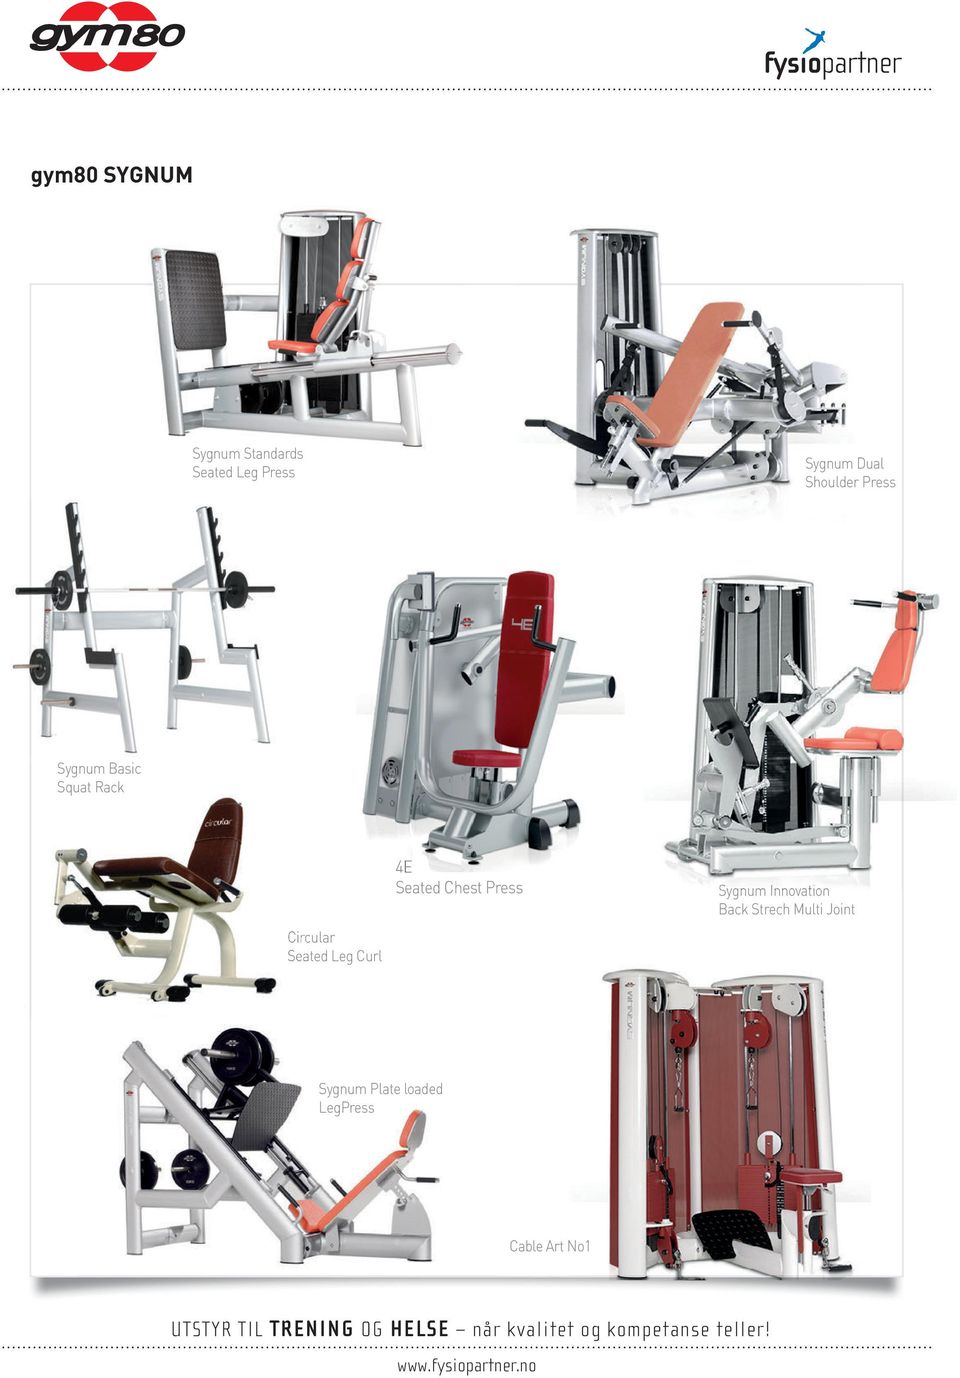 Seated Leg Curl 4E Seated Chest Press Sygnum Innovation